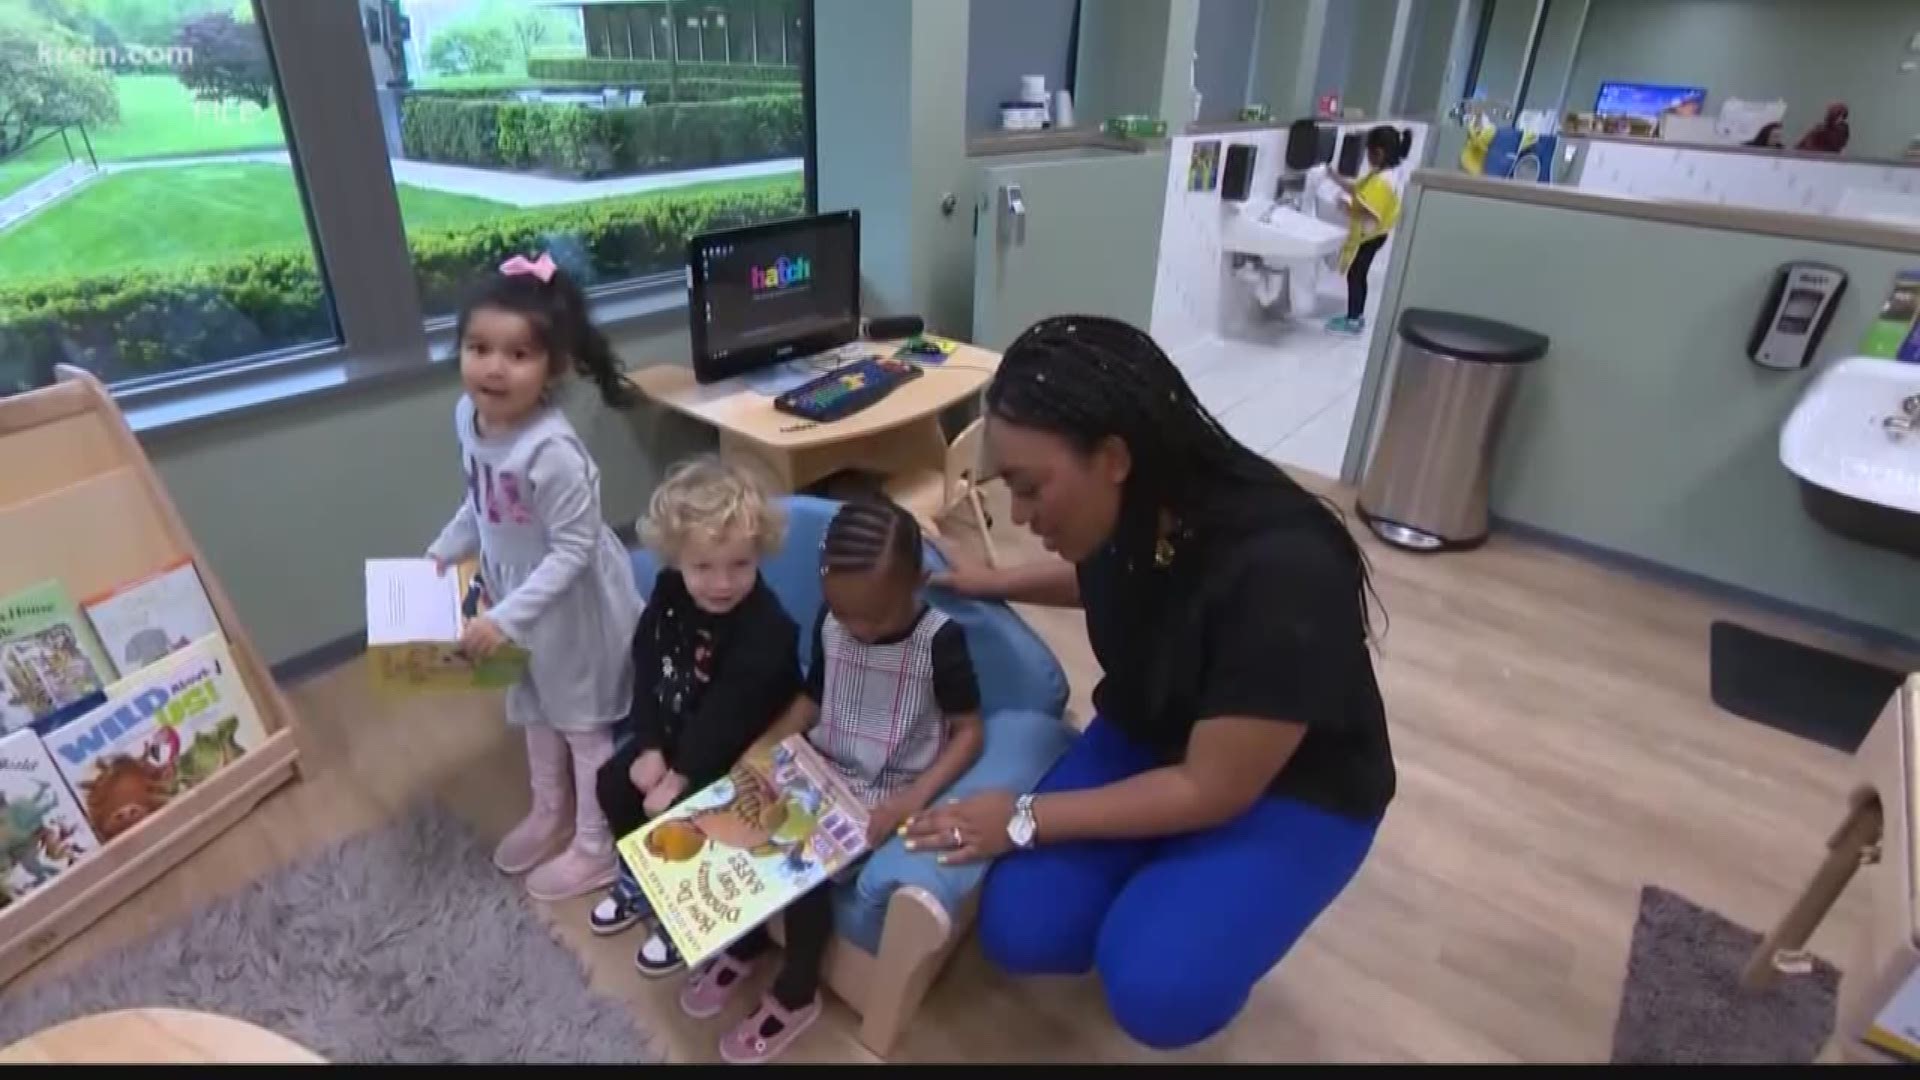 Parents are left wondering whether their child care centers will ever reopen again.